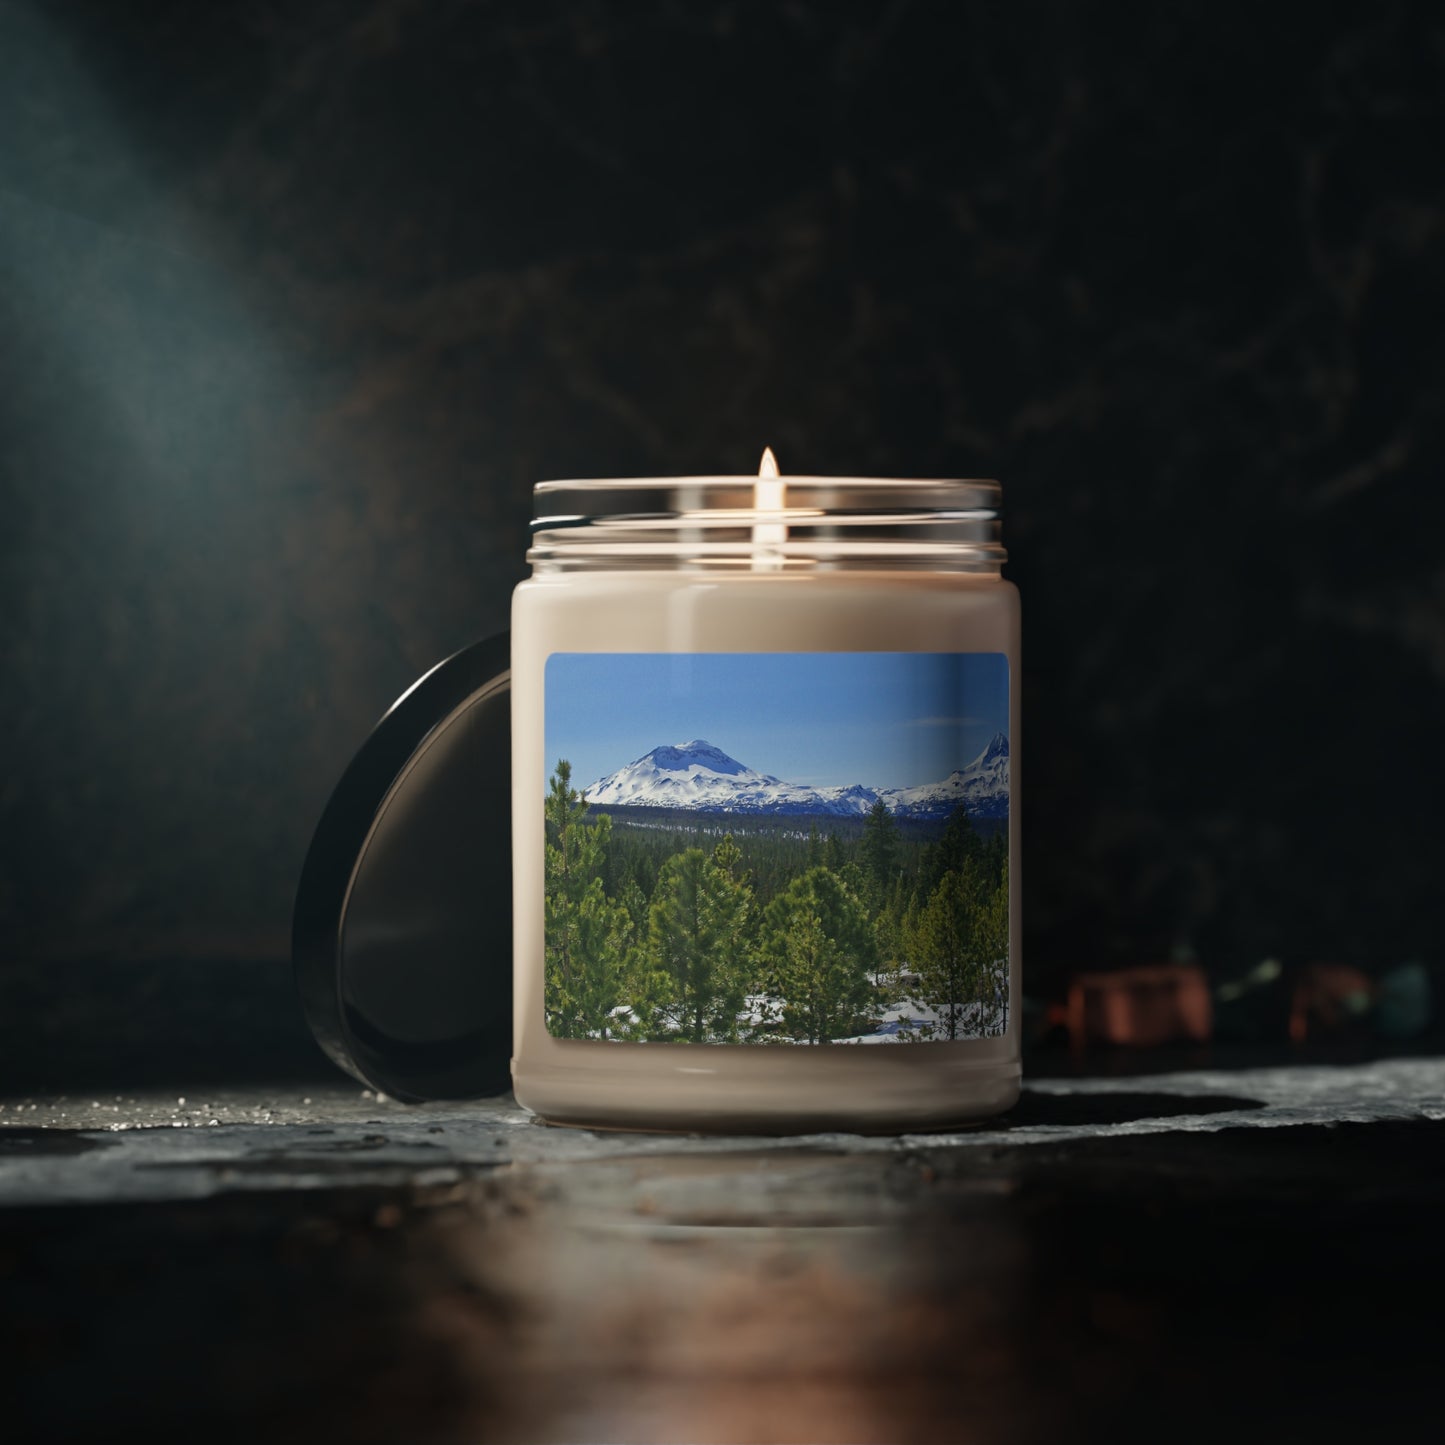 Winter South Sister Scented Soy Candle, 9oz